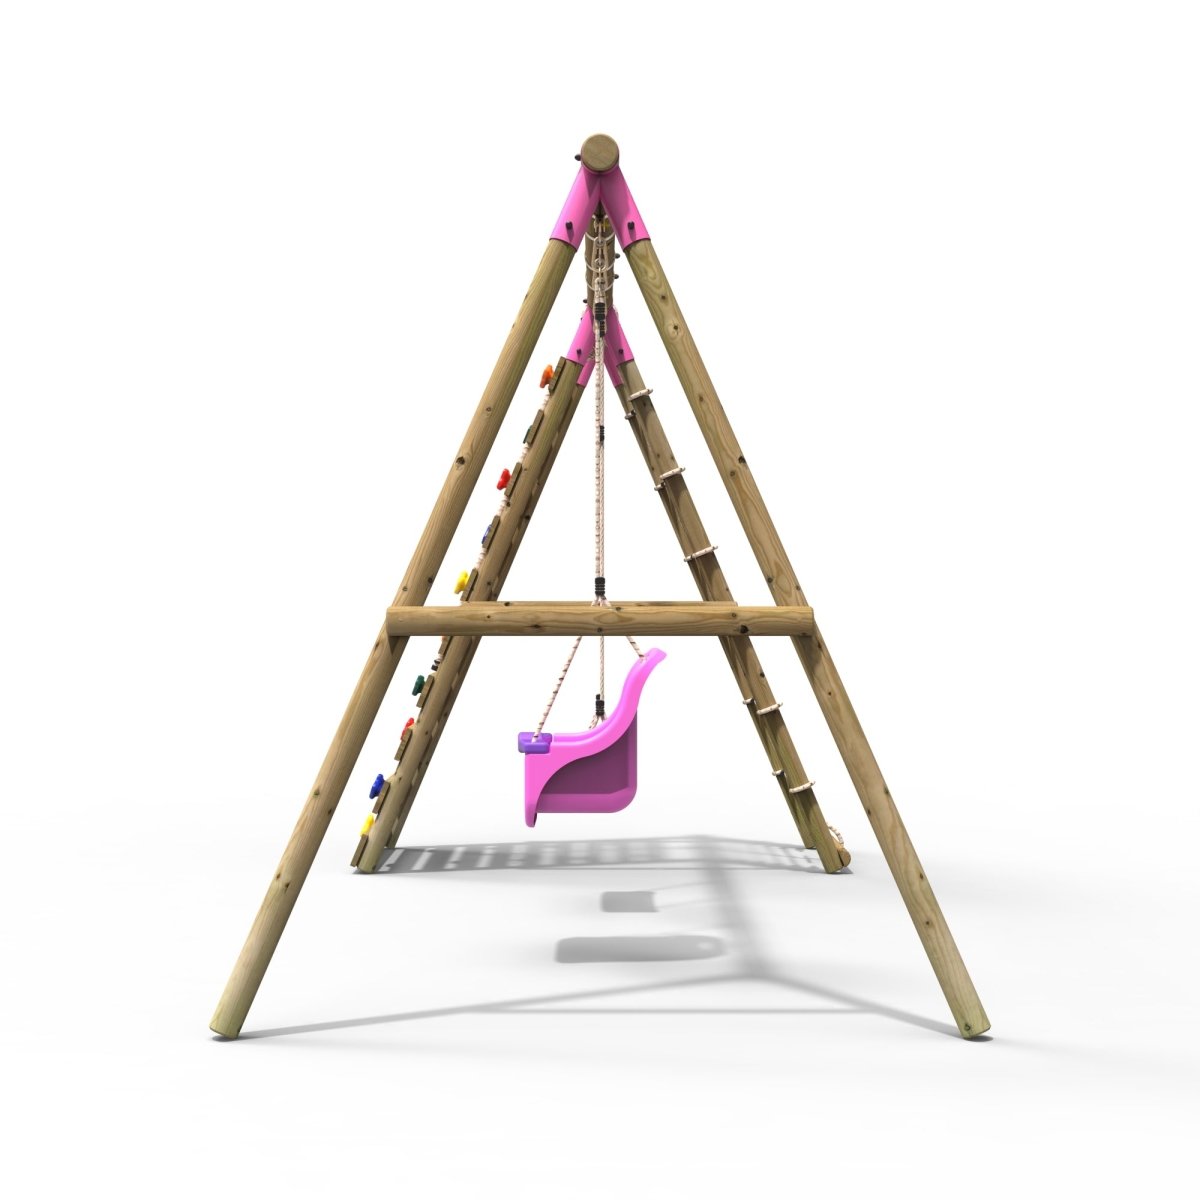 Rebo Wooden Swing Set with Up and Over Climbing Wall - Kai Pink